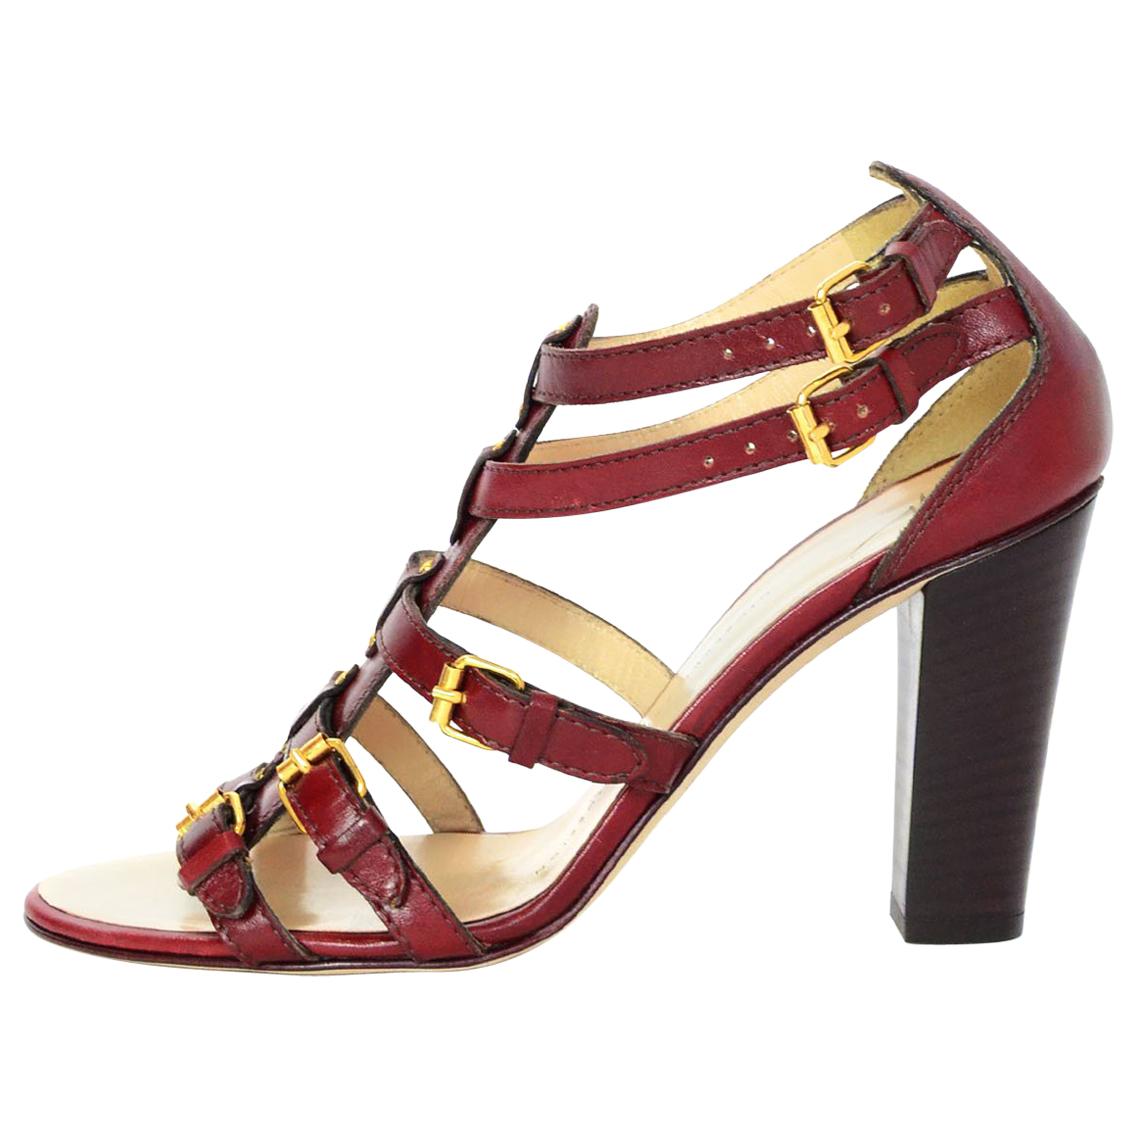 Giuseppe Zanotti Brick Red Leather Caged Sandals Sz 37.5 NEW with DB